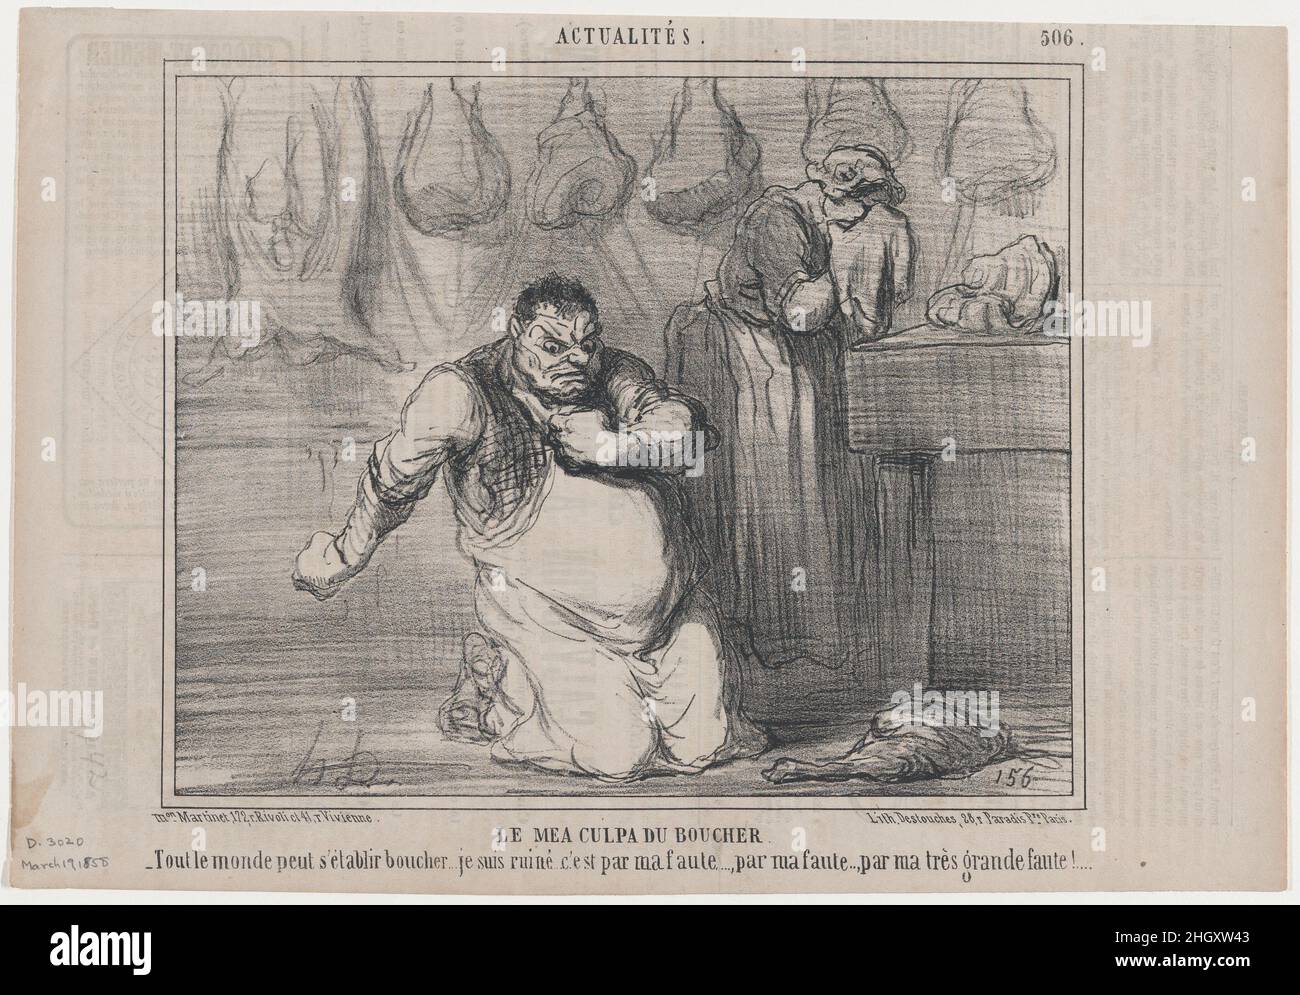 Le mea culpa du boucher, from Actualités, published in Le Charivari, March 19, 1858 March 19, 1858 Honoré Daumier French. Le mea culpa du boucher, from Actualités, published in Le Charivari, March 19, 1858. Actualités. Honoré Daumier (French, Marseilles 1808–1879 Valmondois). March 19, 1858. Lithograph on newsprint; second state of two (Delteil). Aaron Martinet (French, 1762–1841). Prints Stock Photo